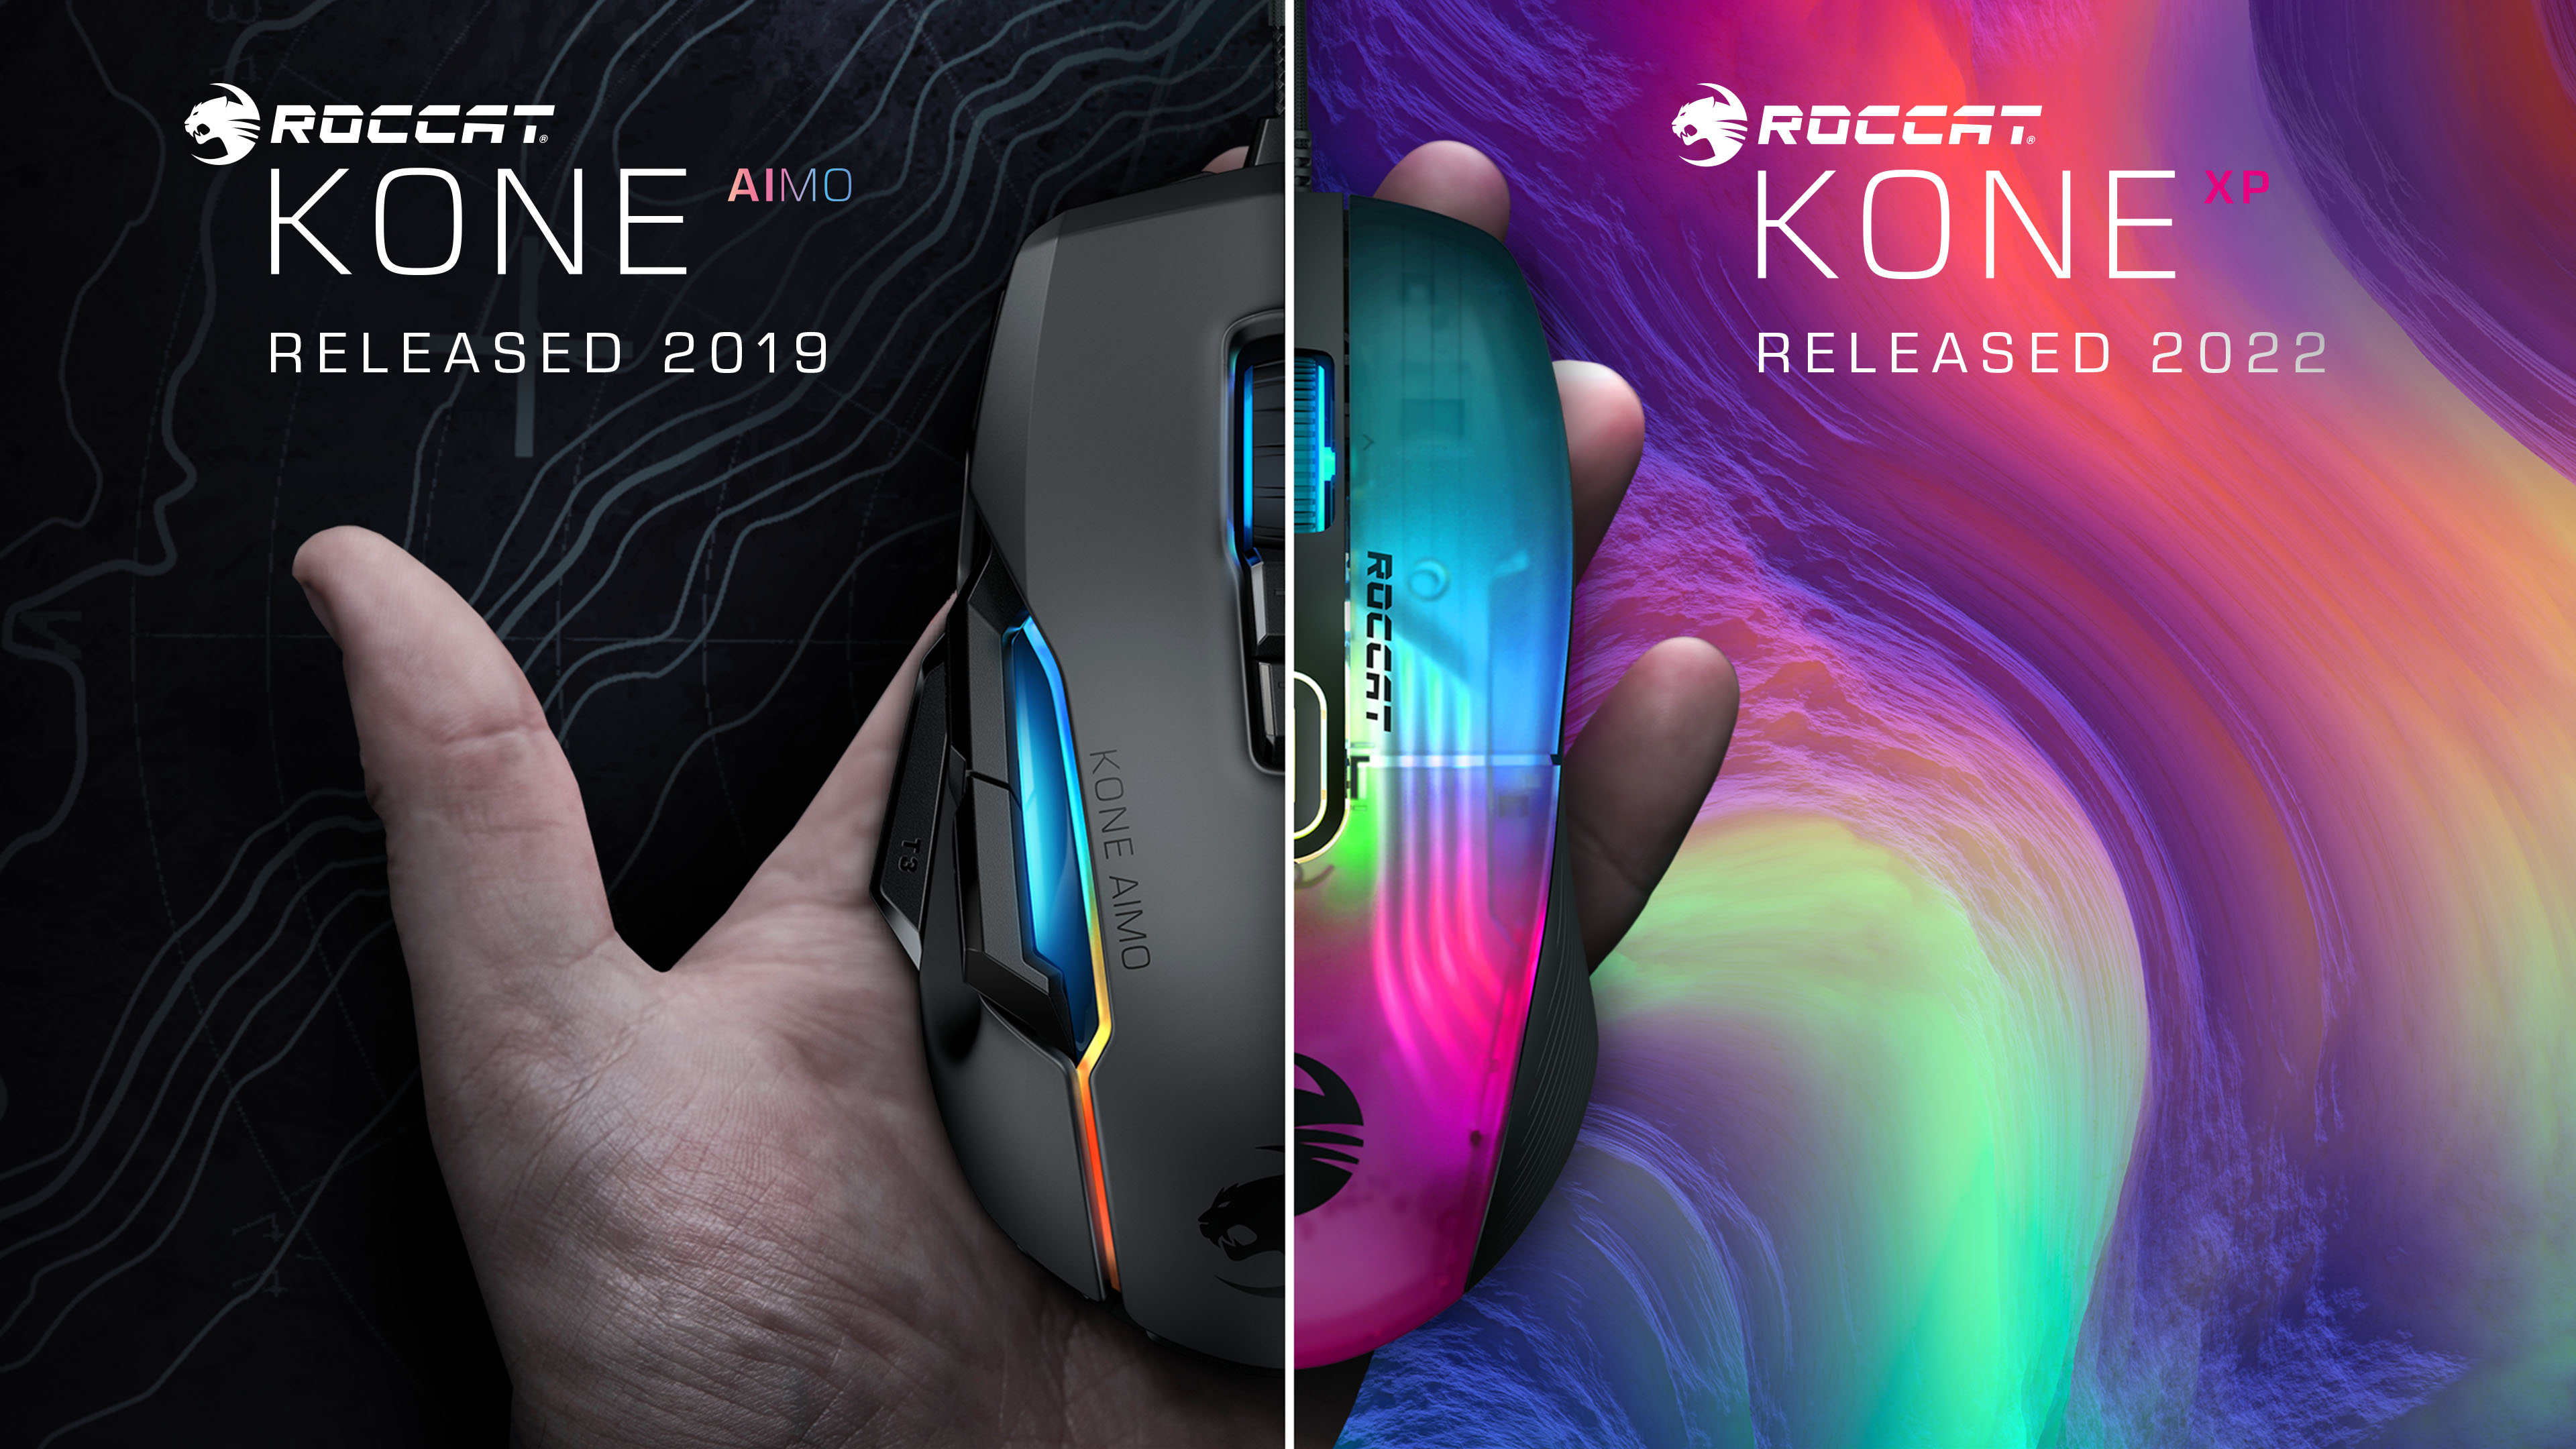 Refines Design XP Business RGB Stunning Brand\'s & Fan-Favorite All-New Kone ROCCAT\'s Specs 3D | the Lighting Wire Mouse Ergonomic Top With